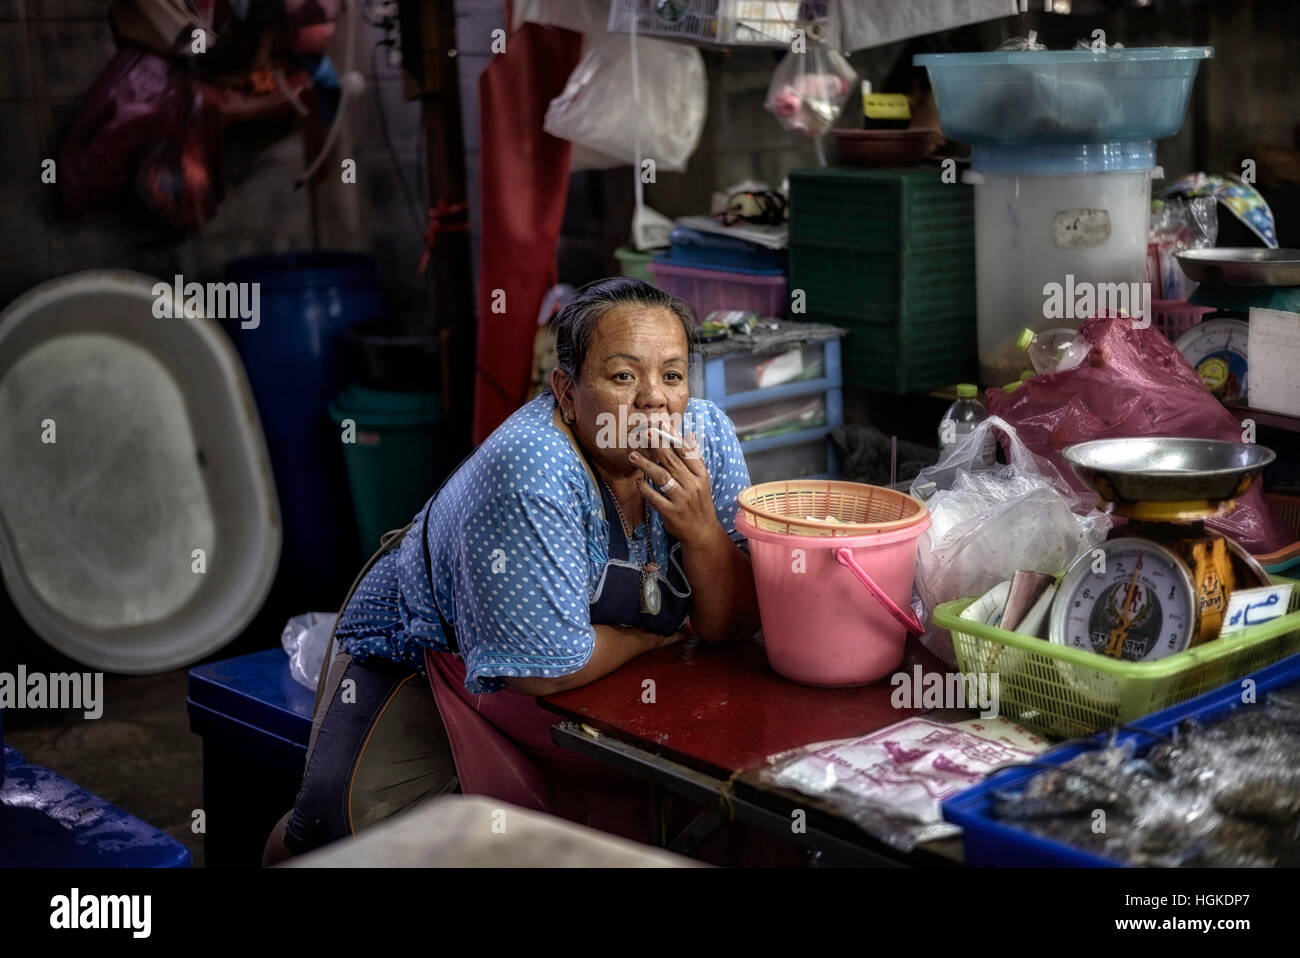 Woman smoking a cigarette at her market stall. Thailand S. E. Asia Stock Photo